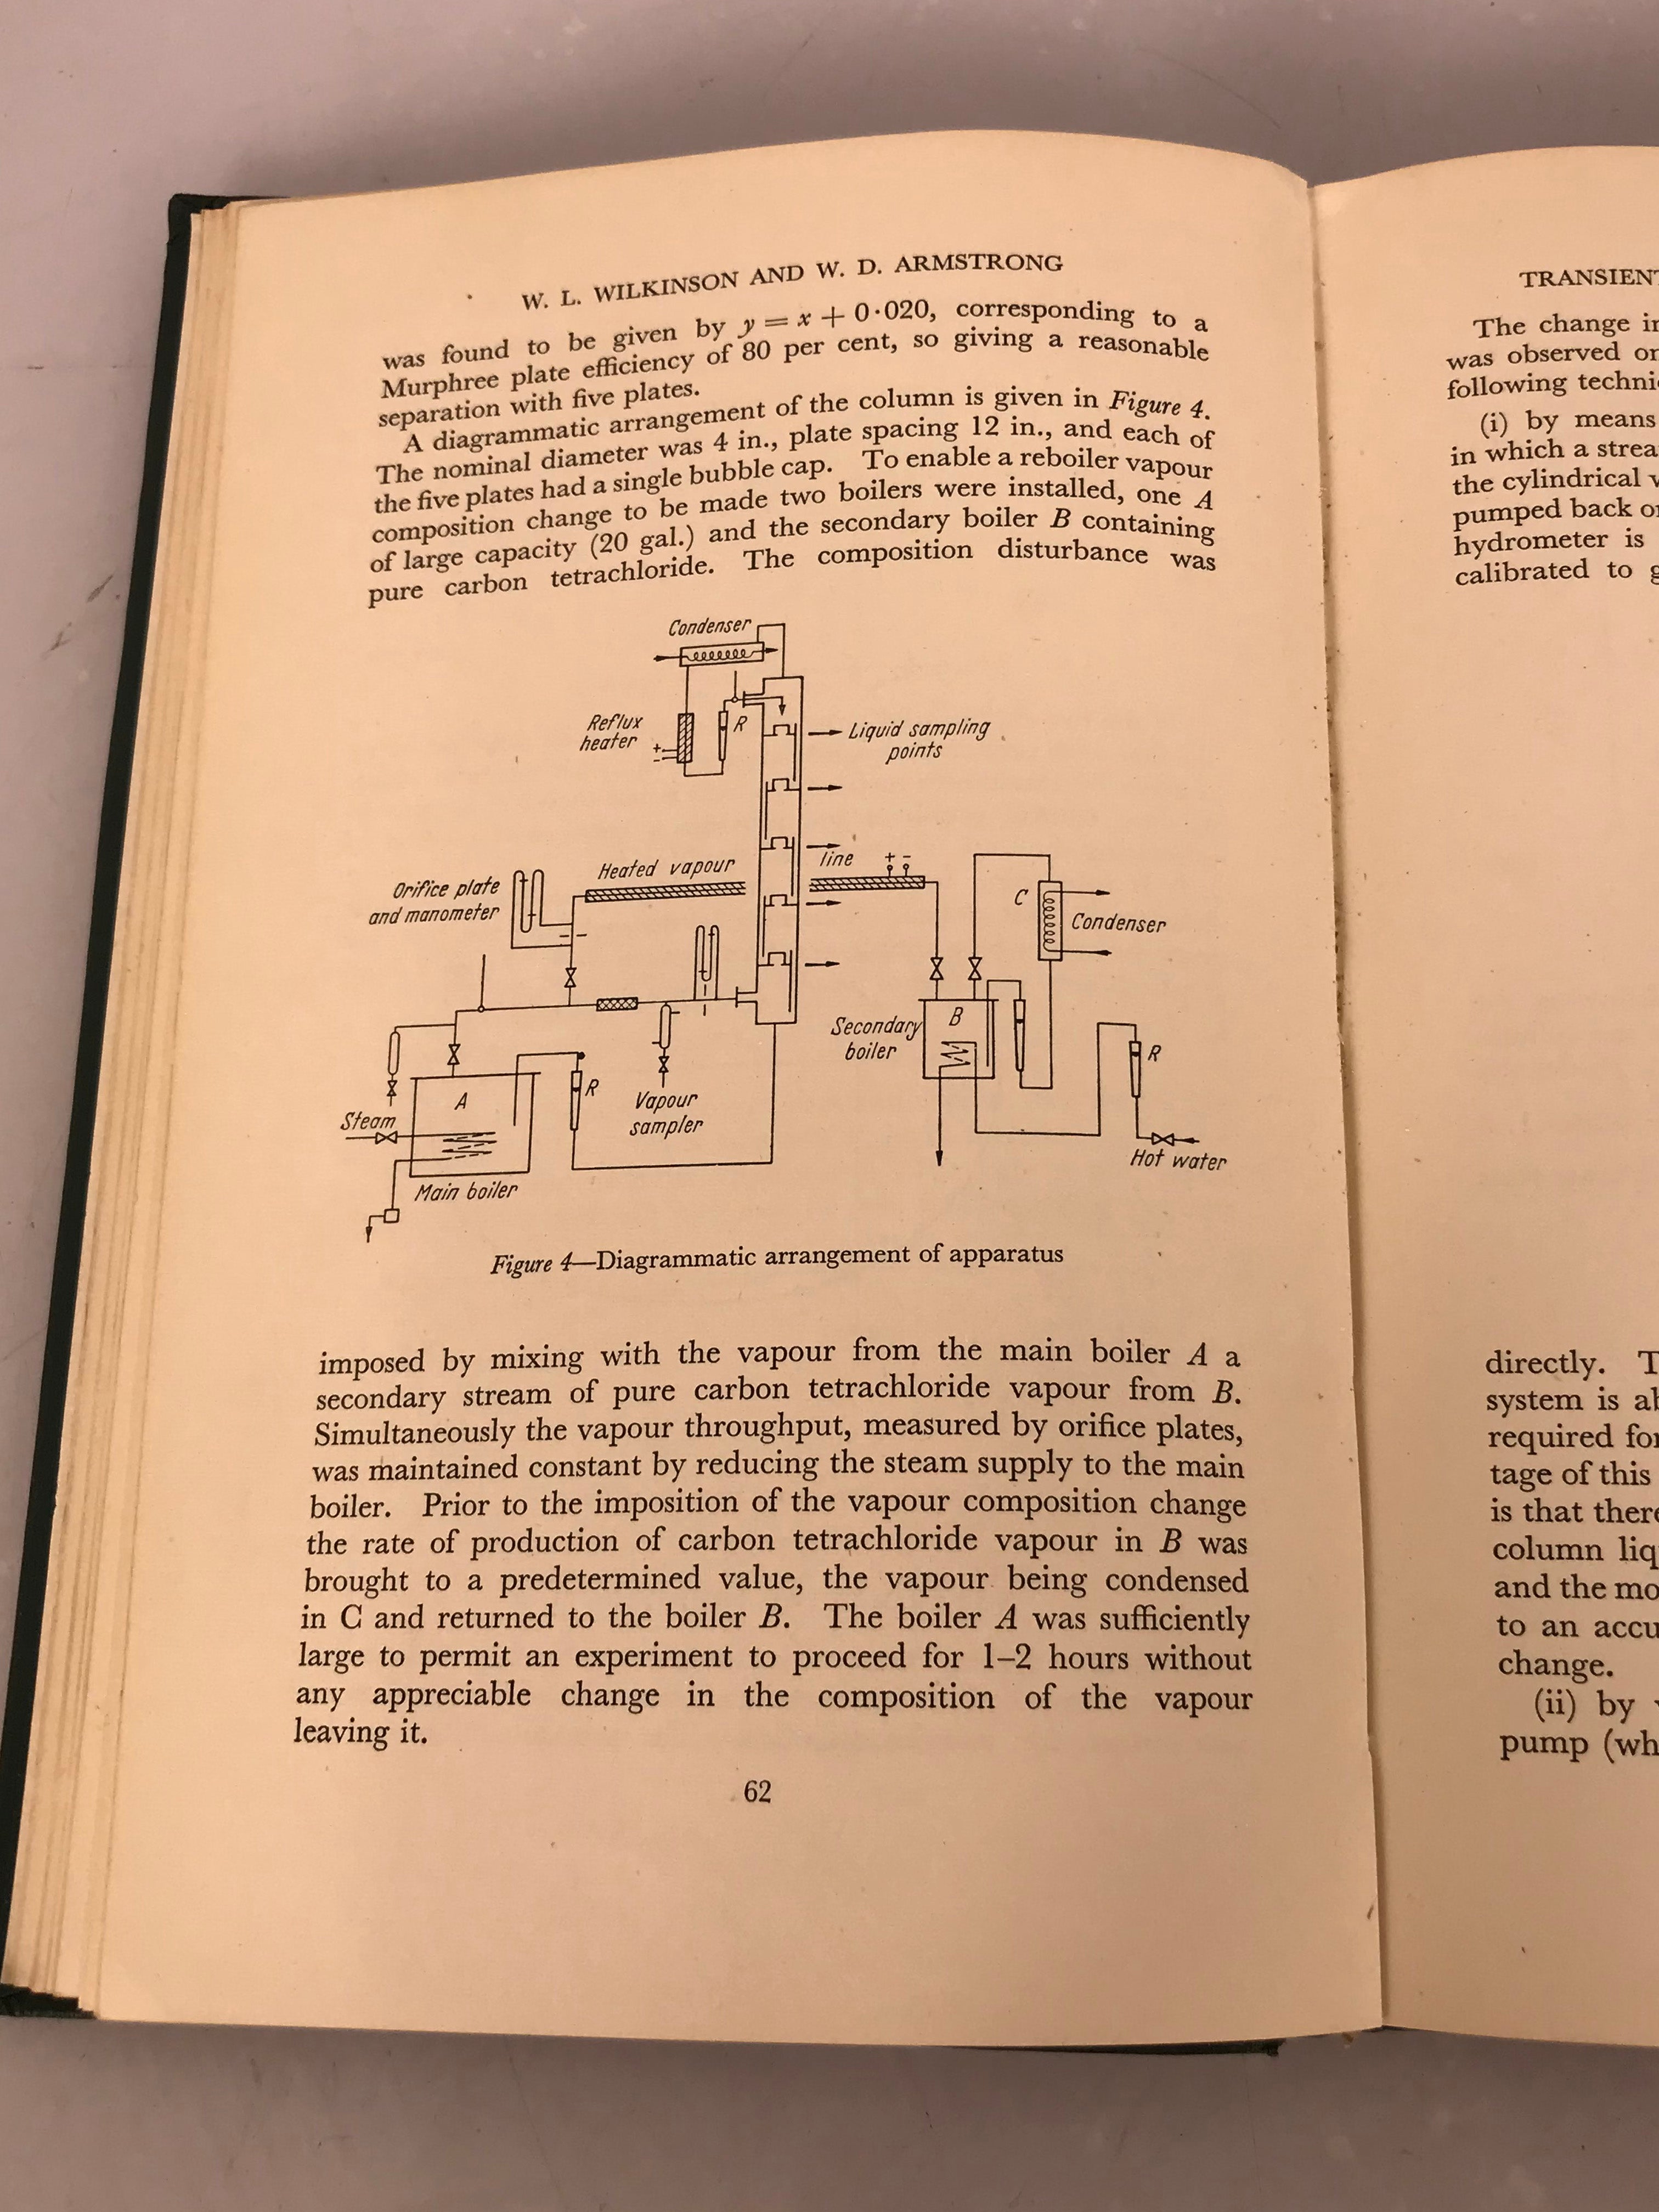 Plant and Process Dynamic Characteristics by The Society of Instrument Technology 1957 HC